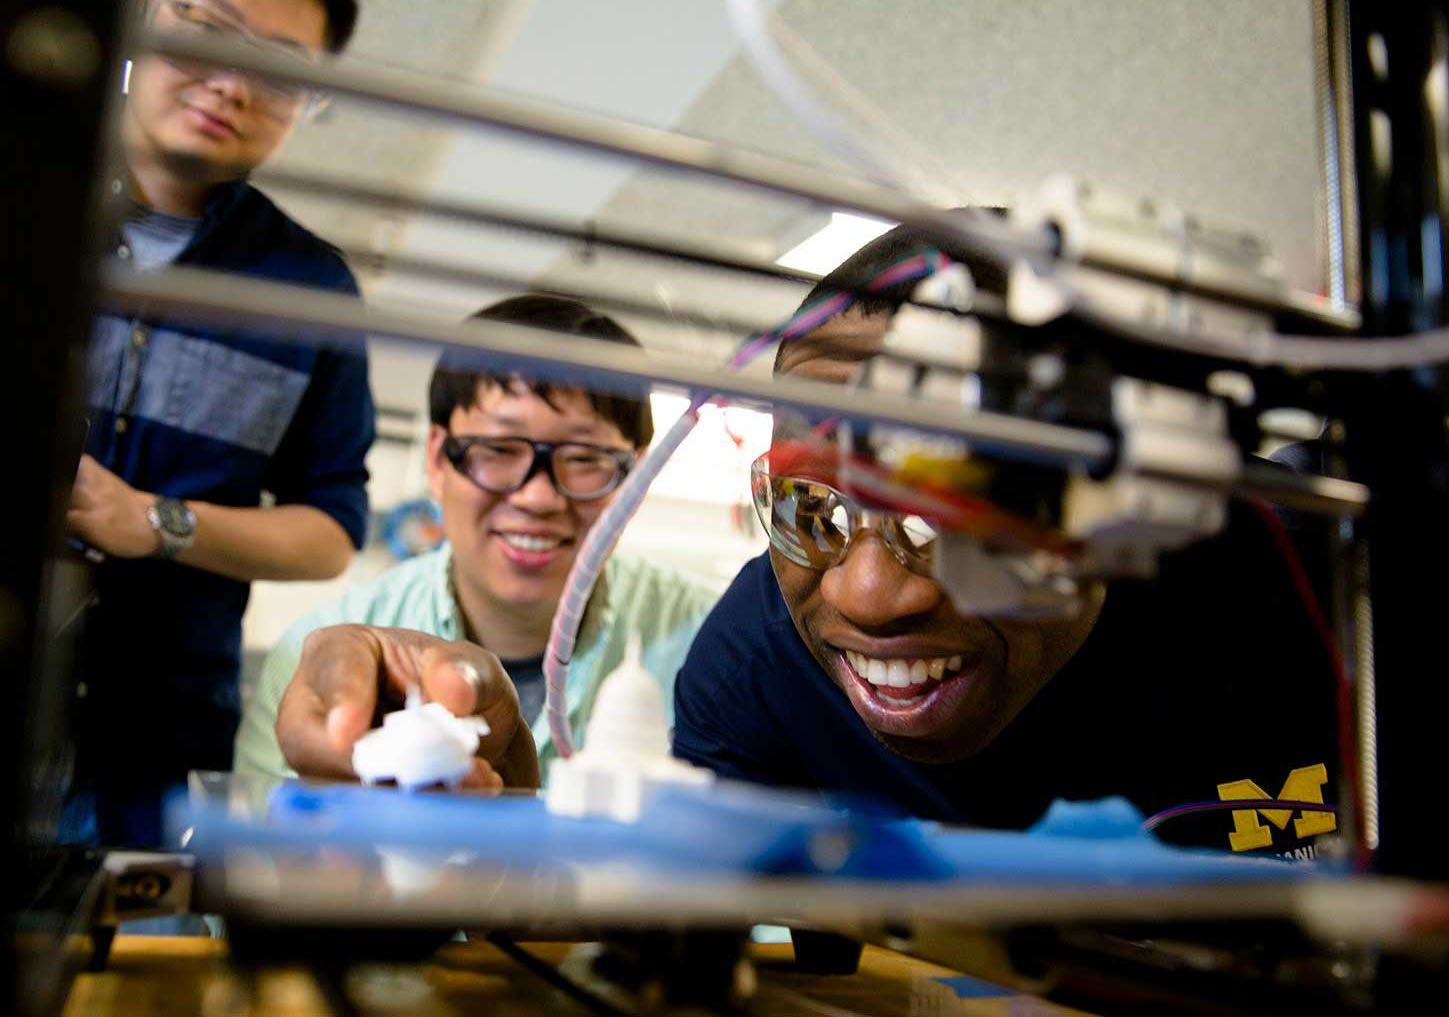 Molong Duon and Deokkyun Yoon, both mechanical engineering PhD students, and Chinedum Okwudire, associate professor in mechanical engineering, examine the effectiveness of their new, faster 3D printing algorithm. Credit: Evan Dougherty, Michigan Engineering